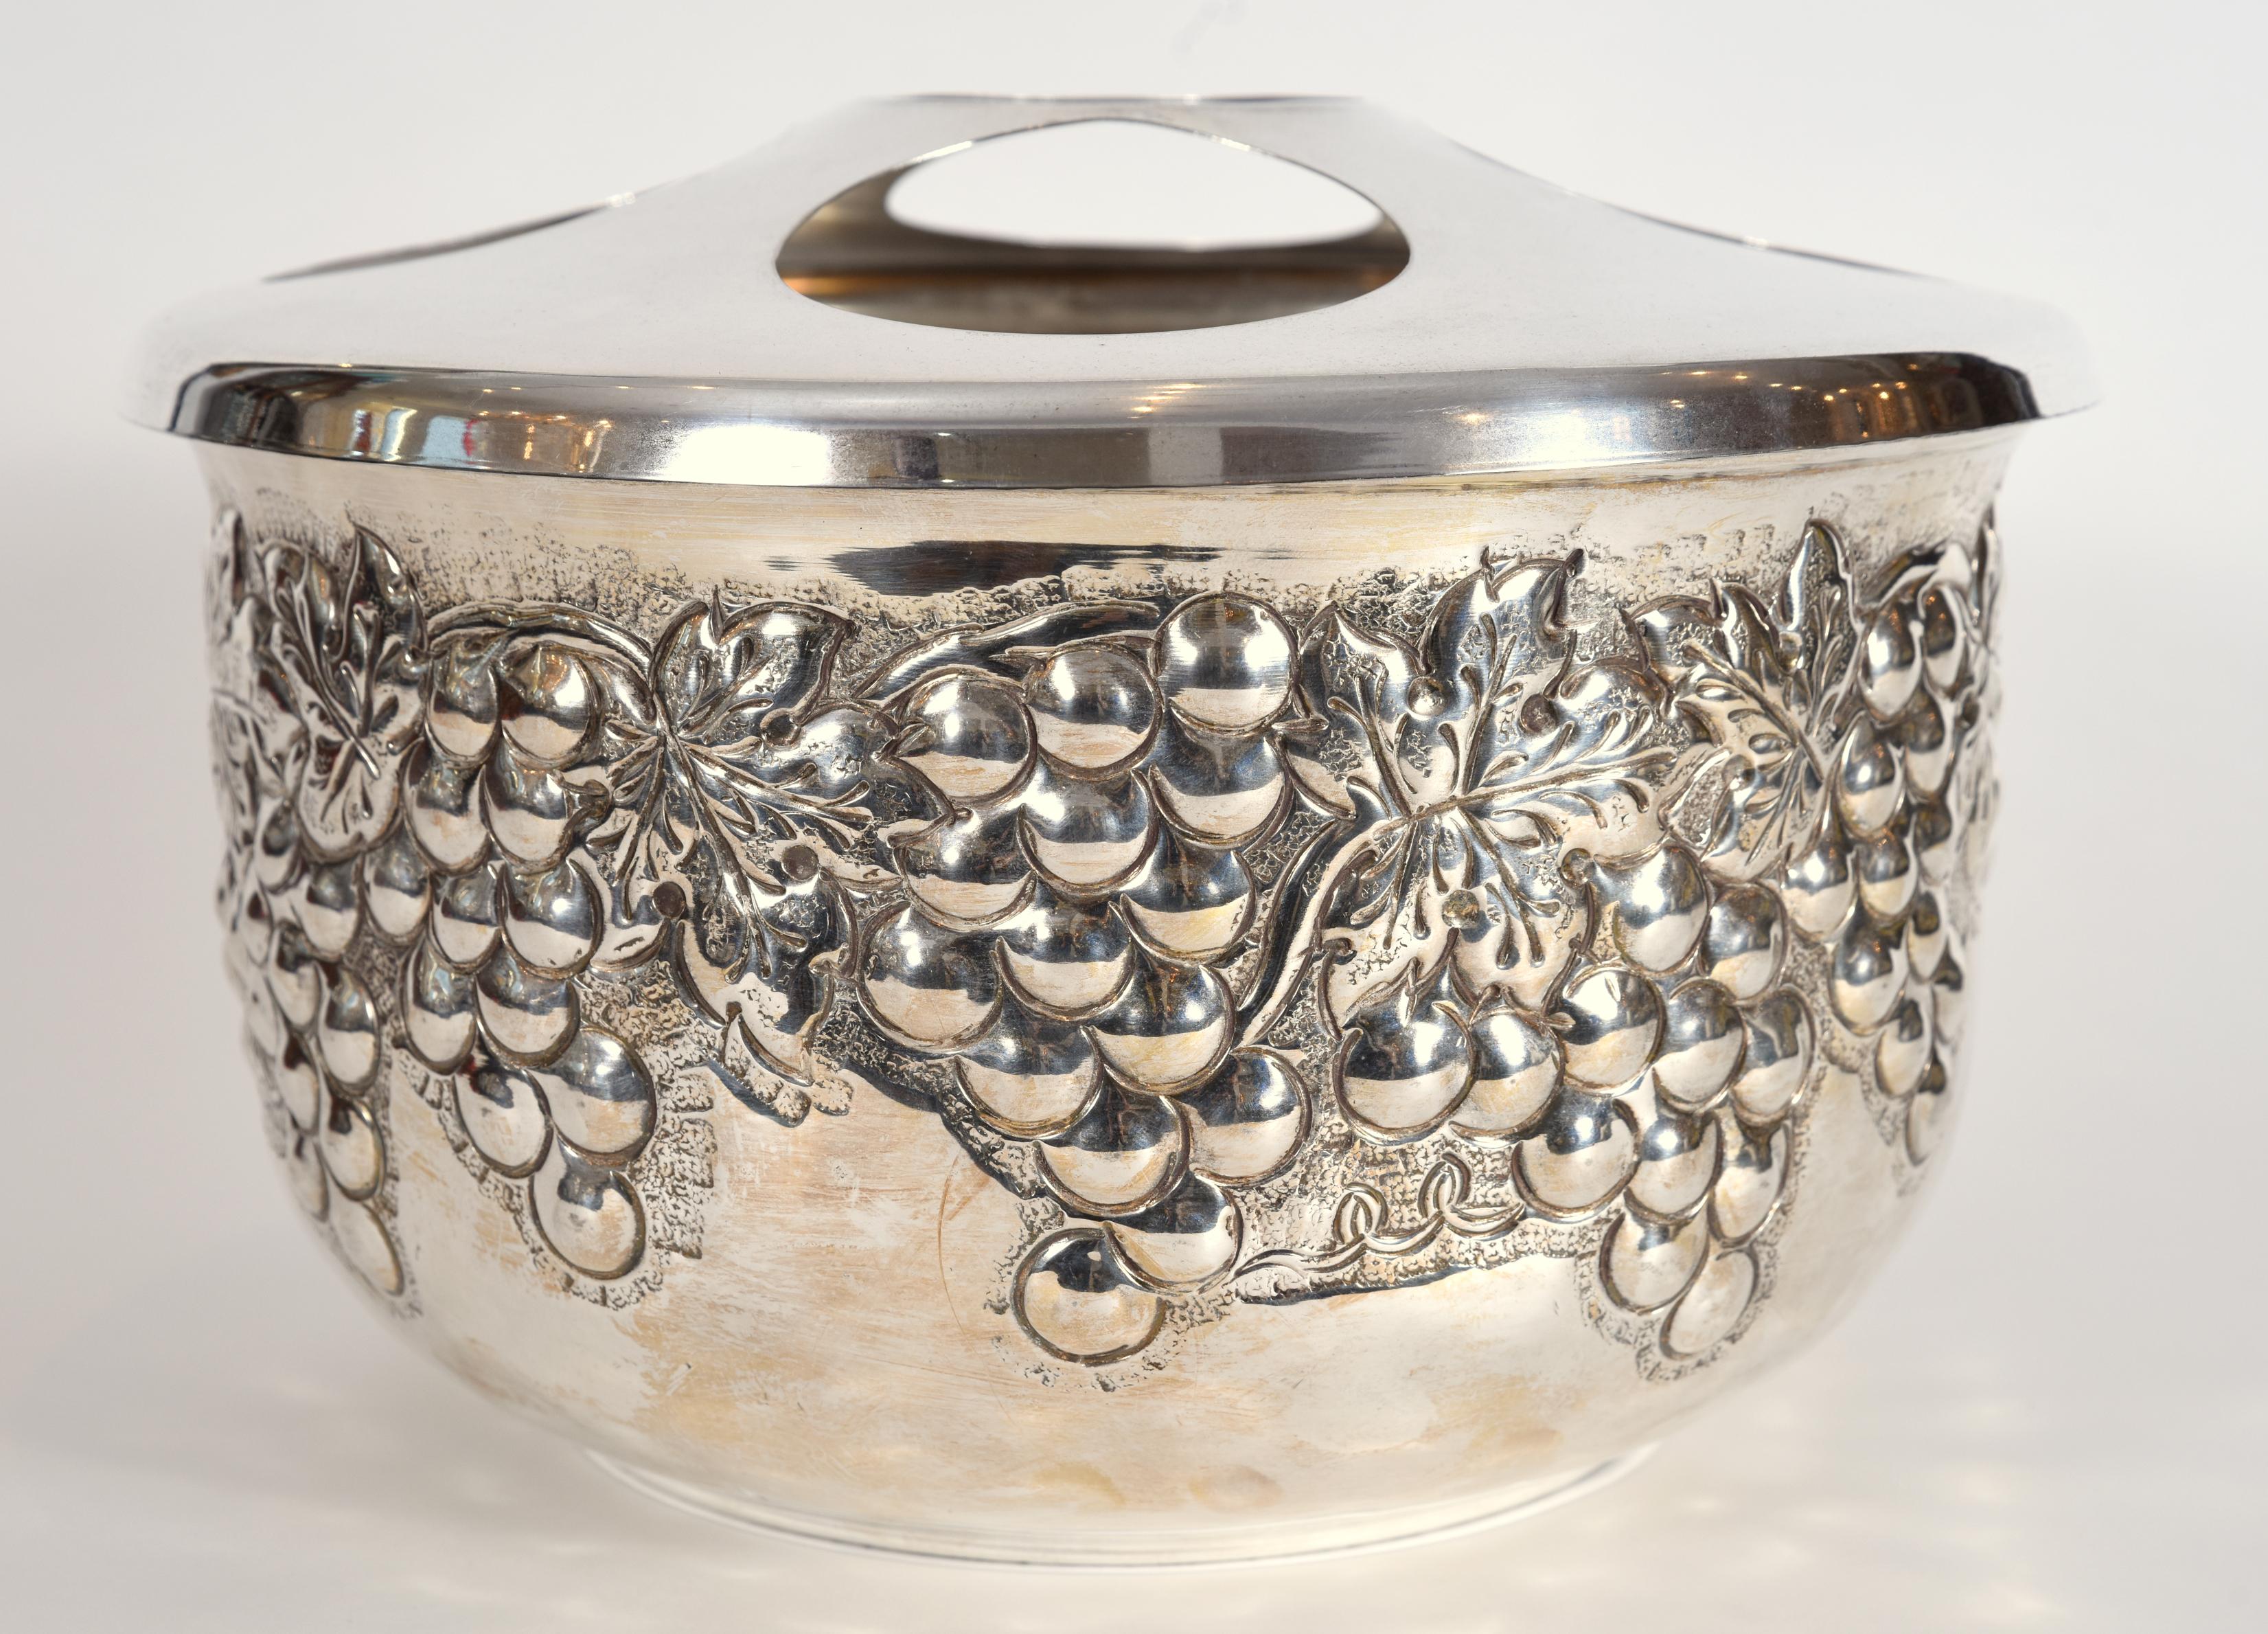 Exquisite silver plated round covered five bottles wine or champagne cooler or Ice bucket with intricate exterior decorative design motifs of grapes and vines. The round removable cover seat easily five bottles of wine or champagne. This barware or